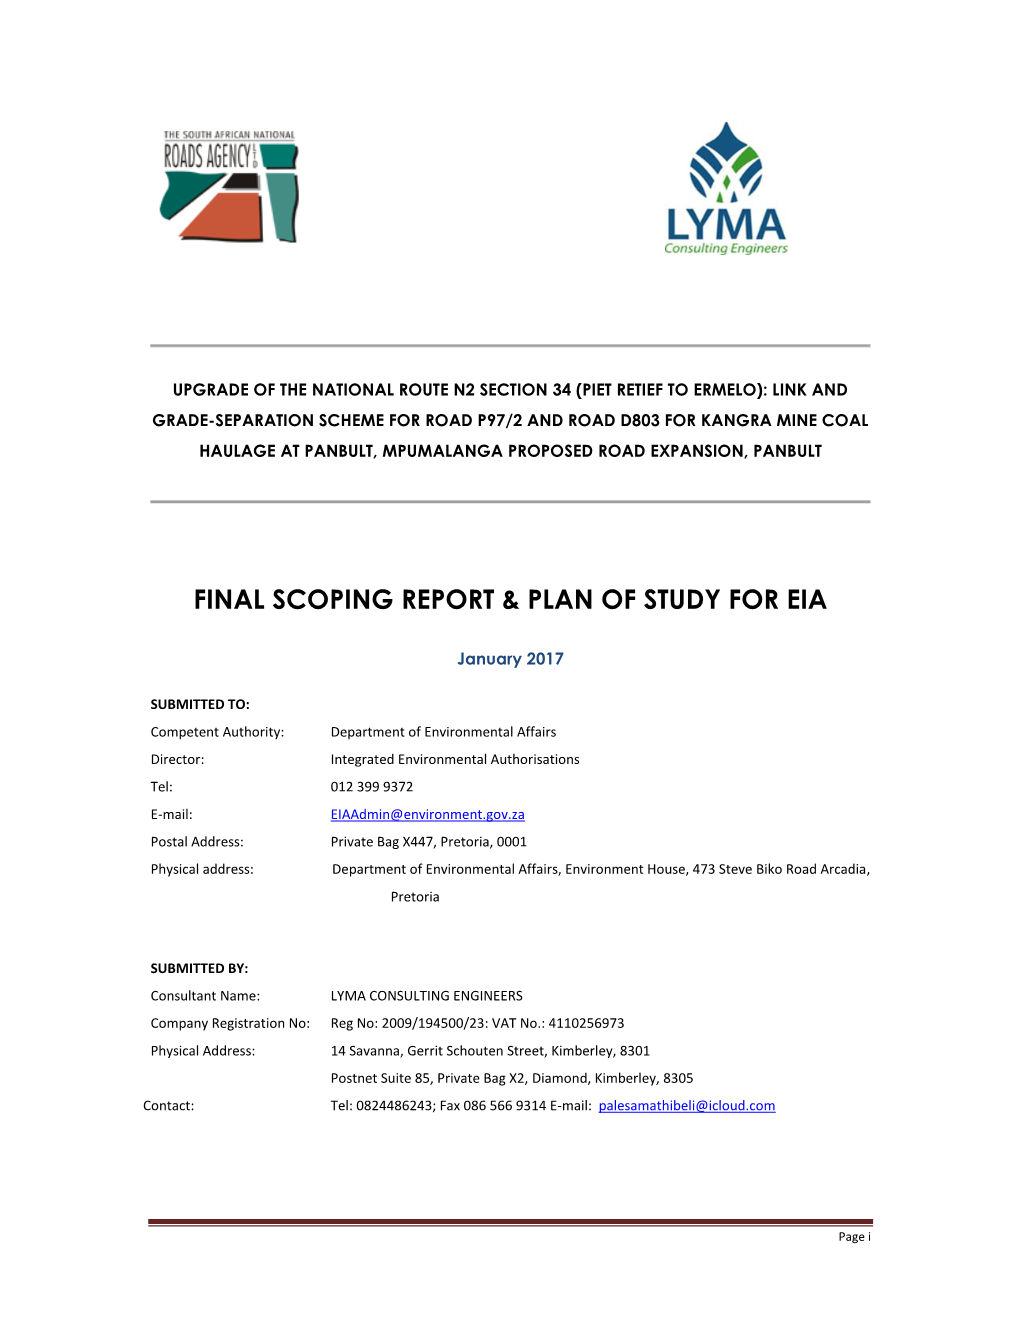 Final Scoping Report & Plan of Study For